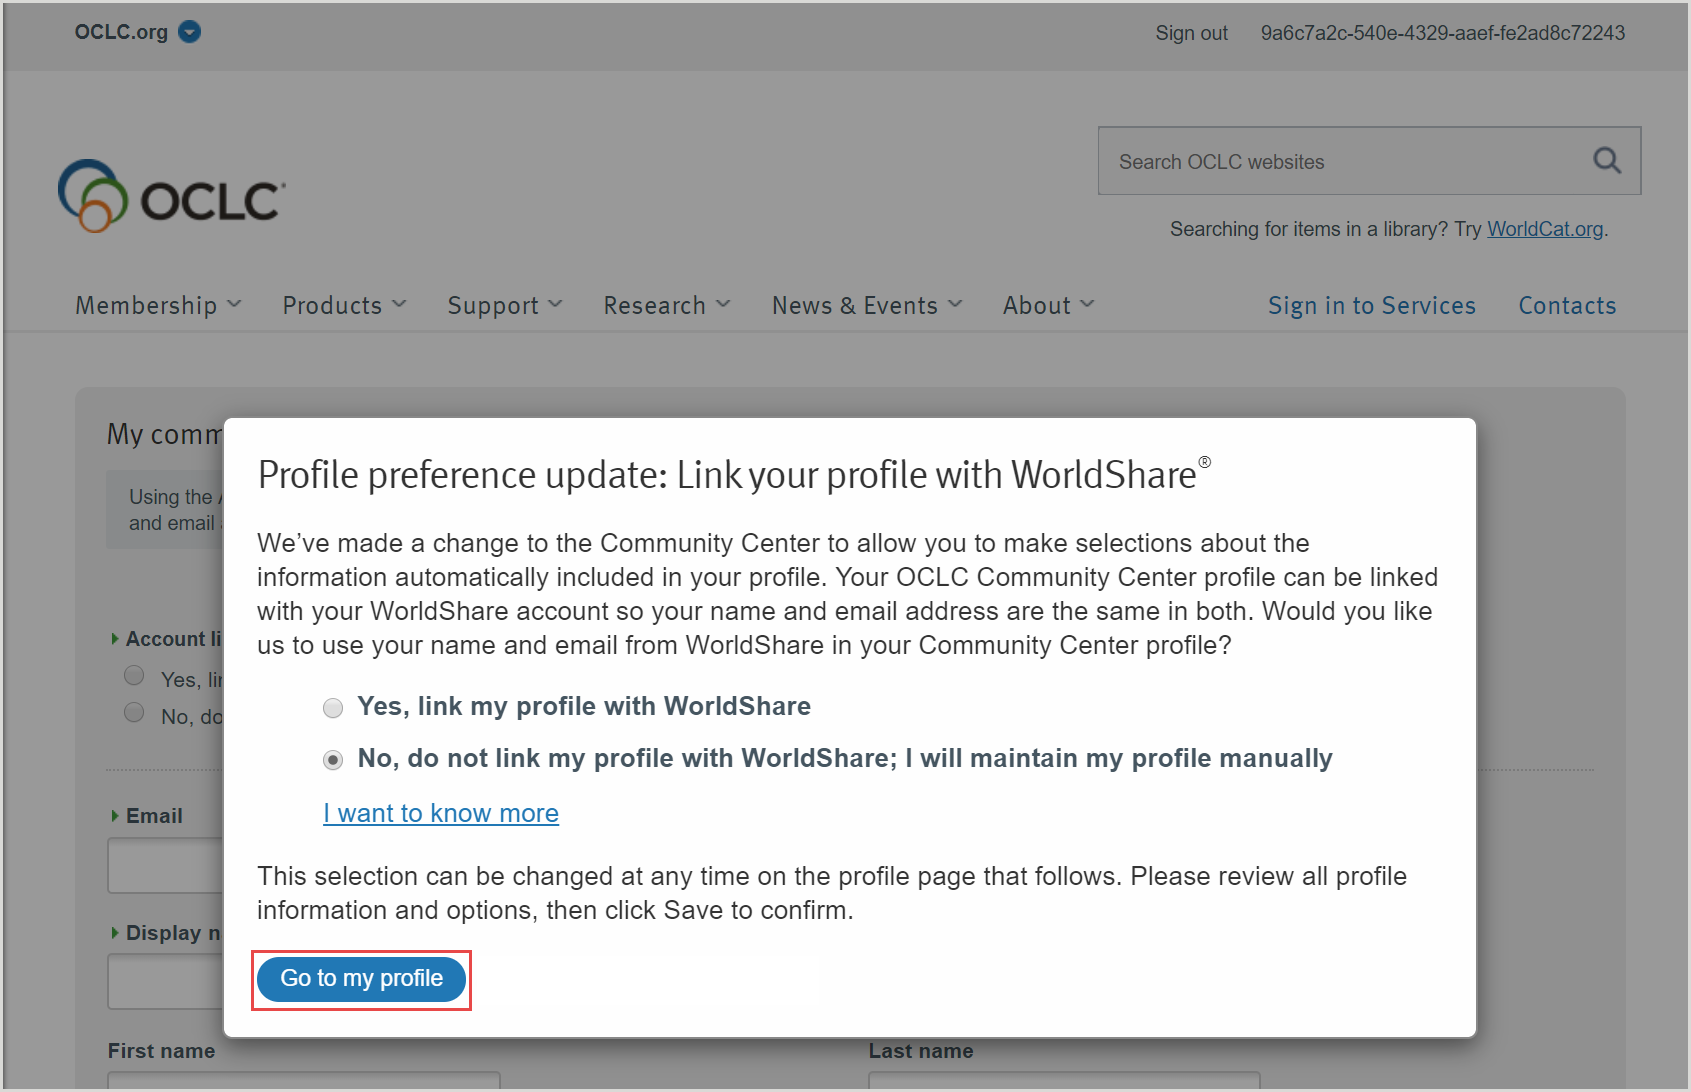 Link your profile with WorldShare dialog window